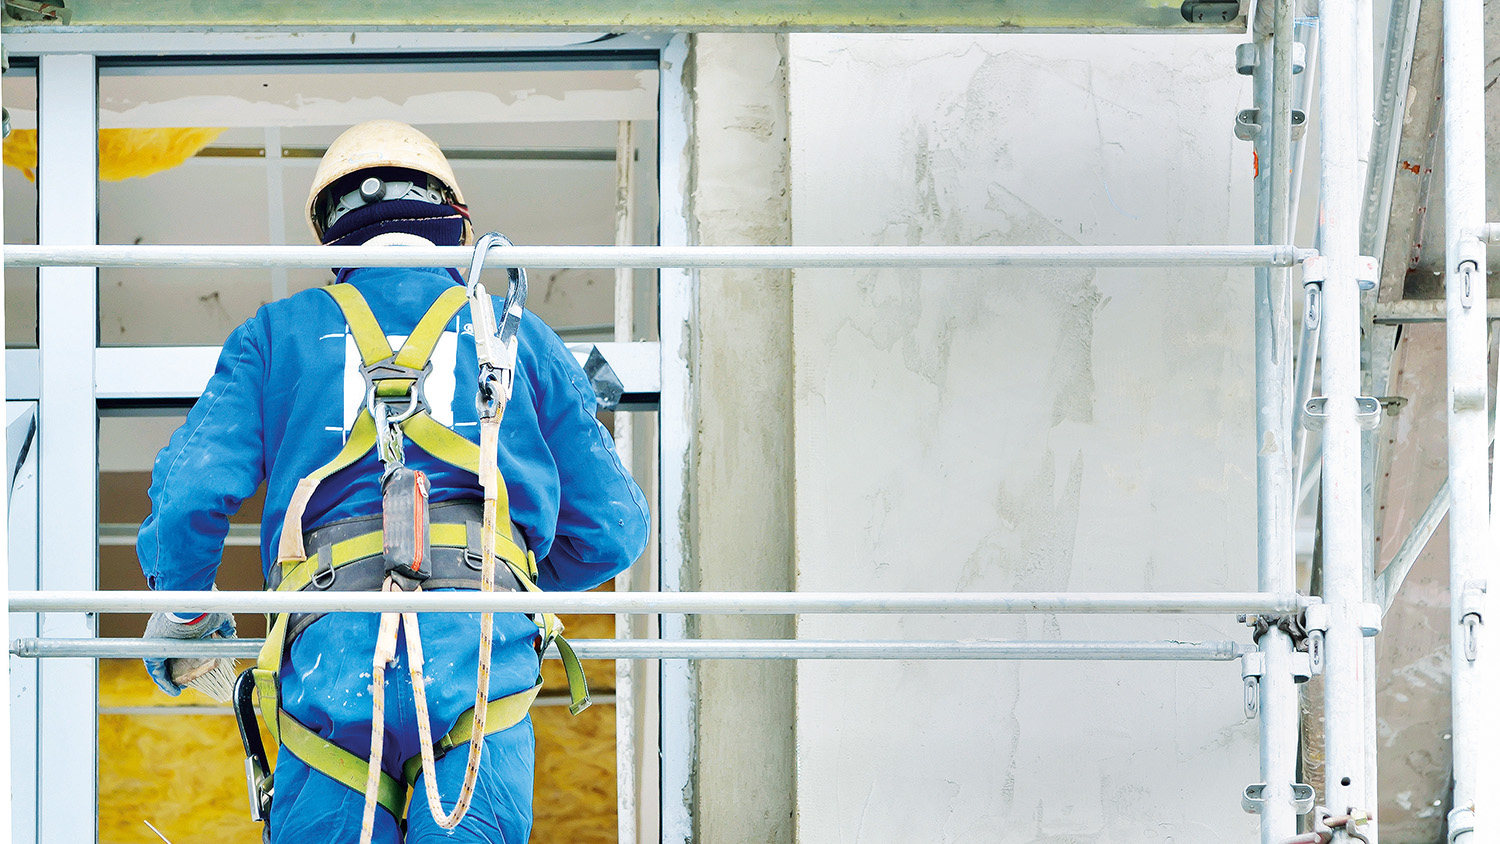 Scaffold access accidents